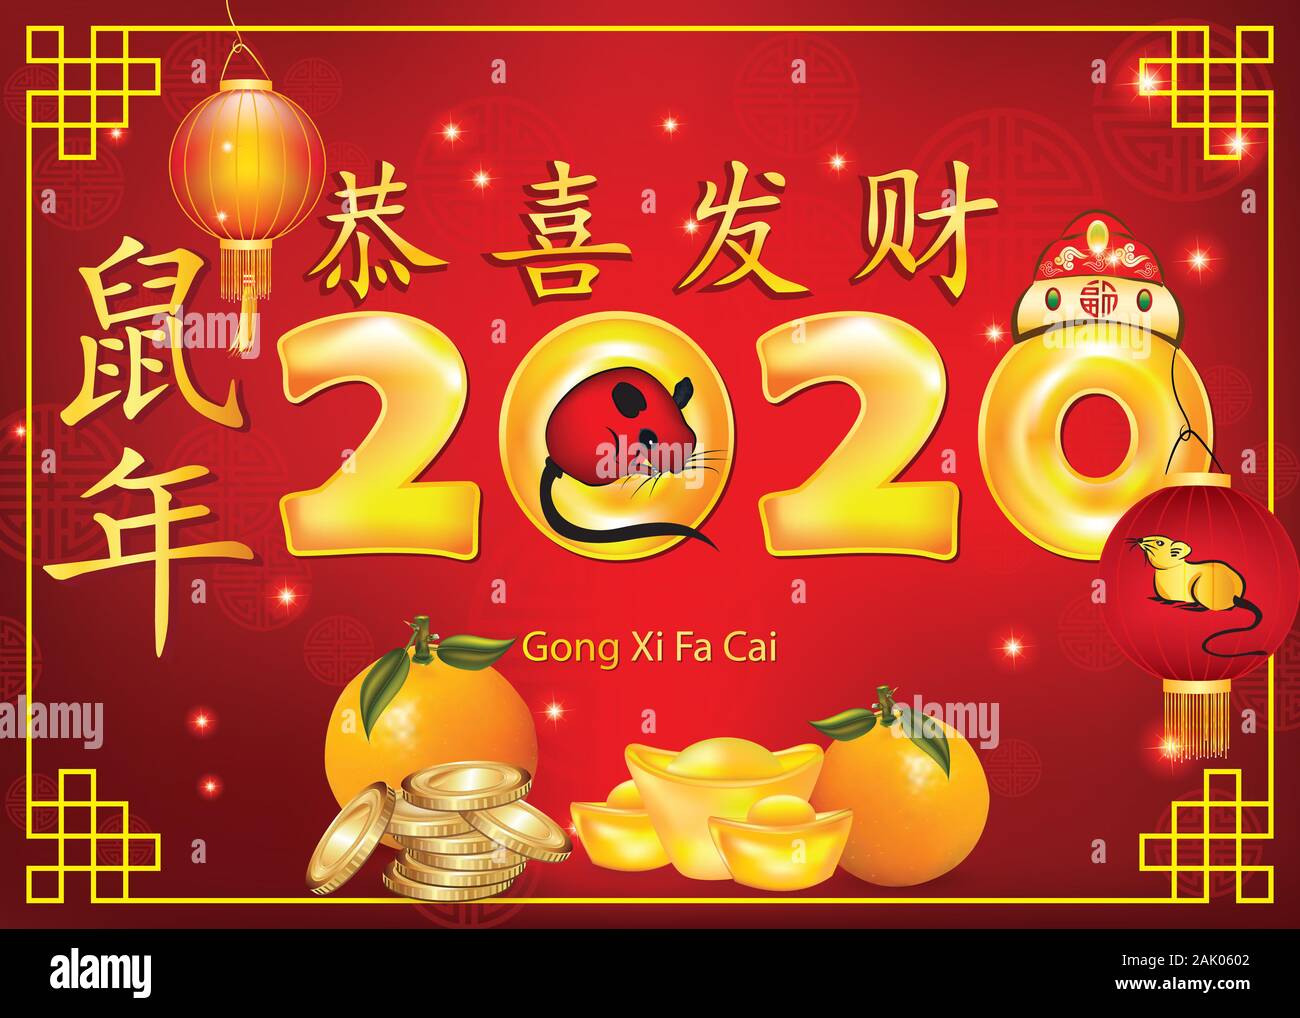 Red envelope / traditional Chinese greeting card - Happy Chinese New Year of the Rat 2020! Ideograms translation: Congratulations and get rich. Stock Photo